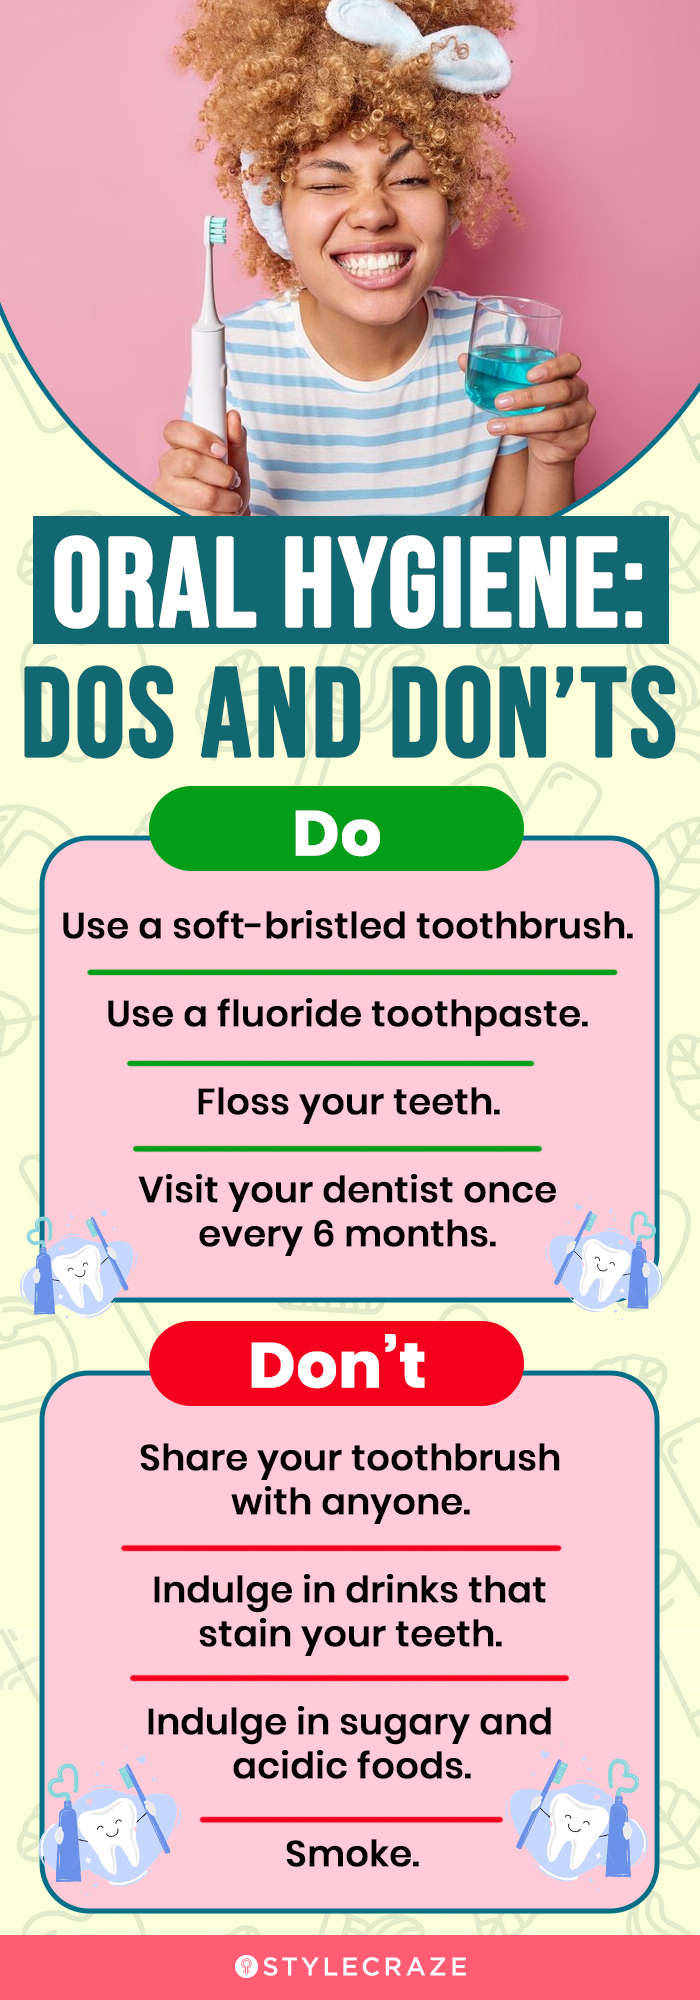 oral hygiene dos and don’ts (infographic)